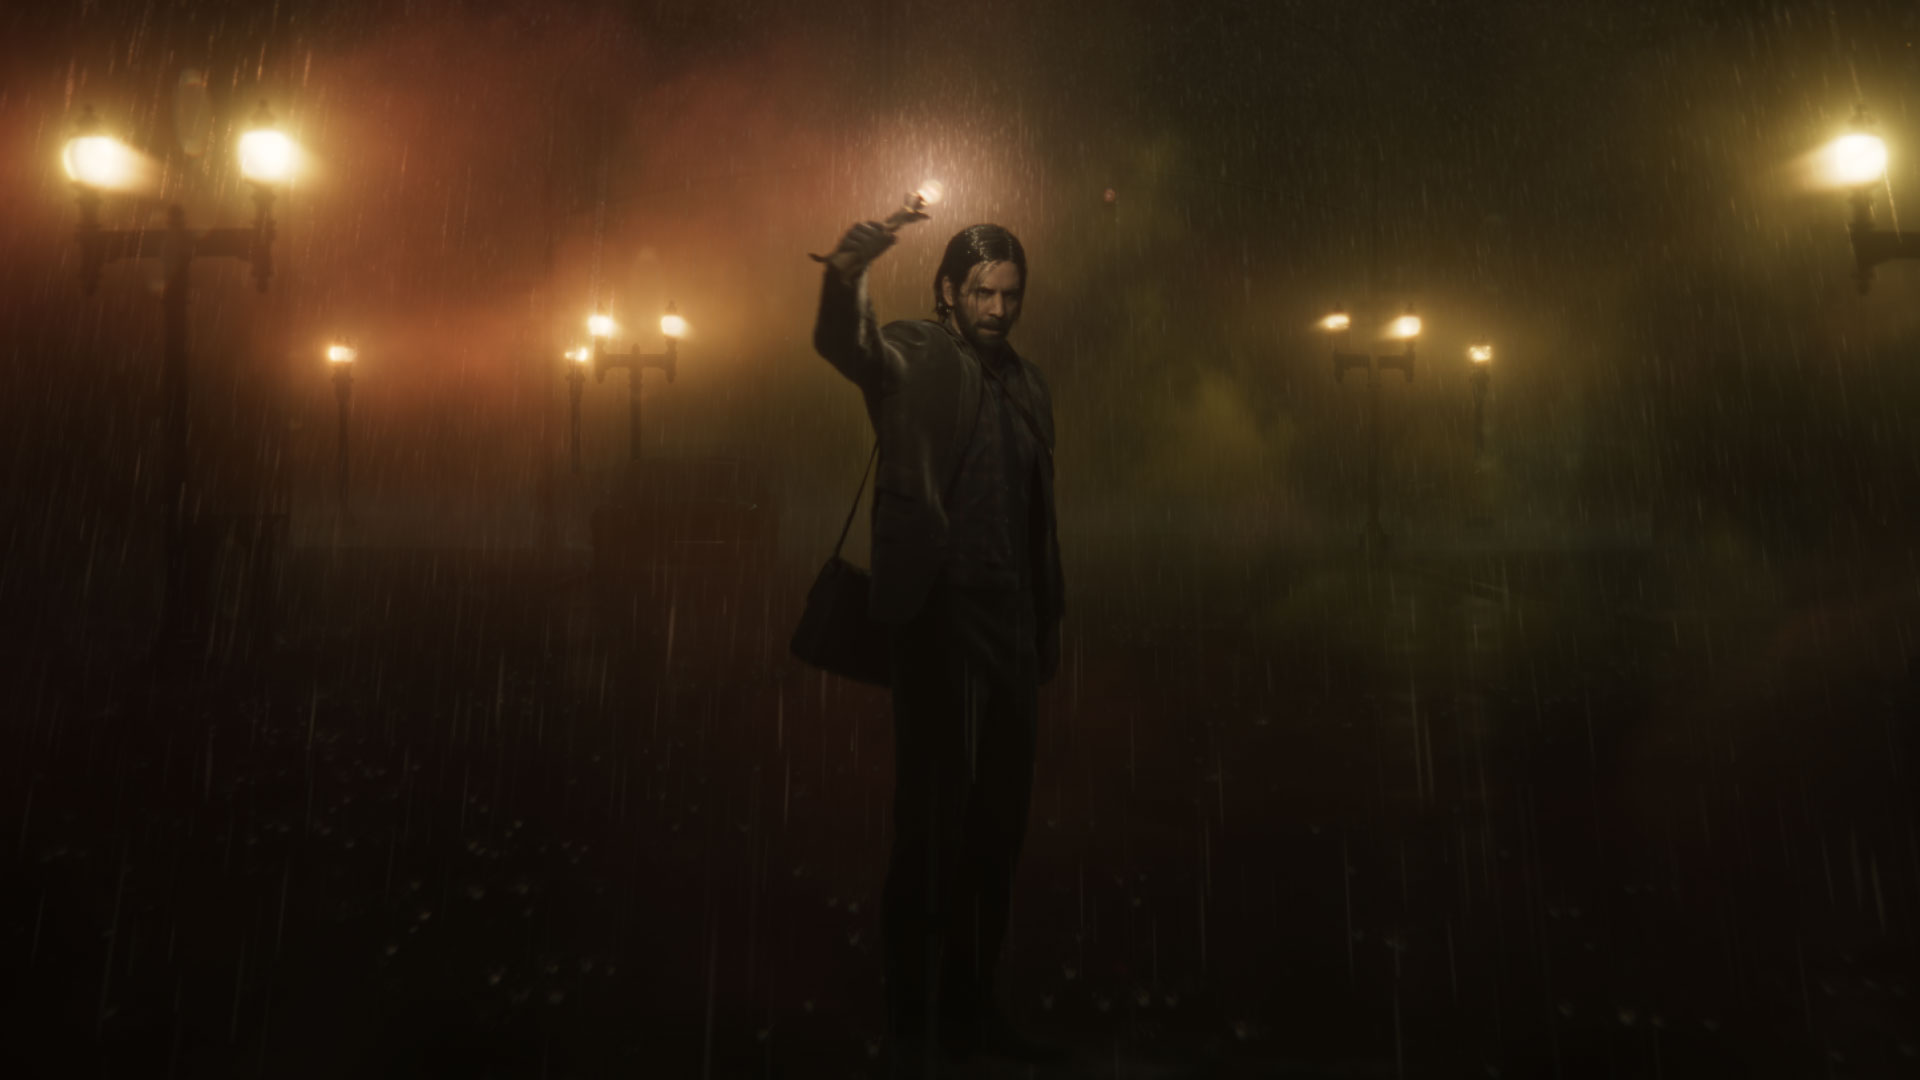 Alan Wake 2 Officially Announced, Will Be Remedy's First Survival